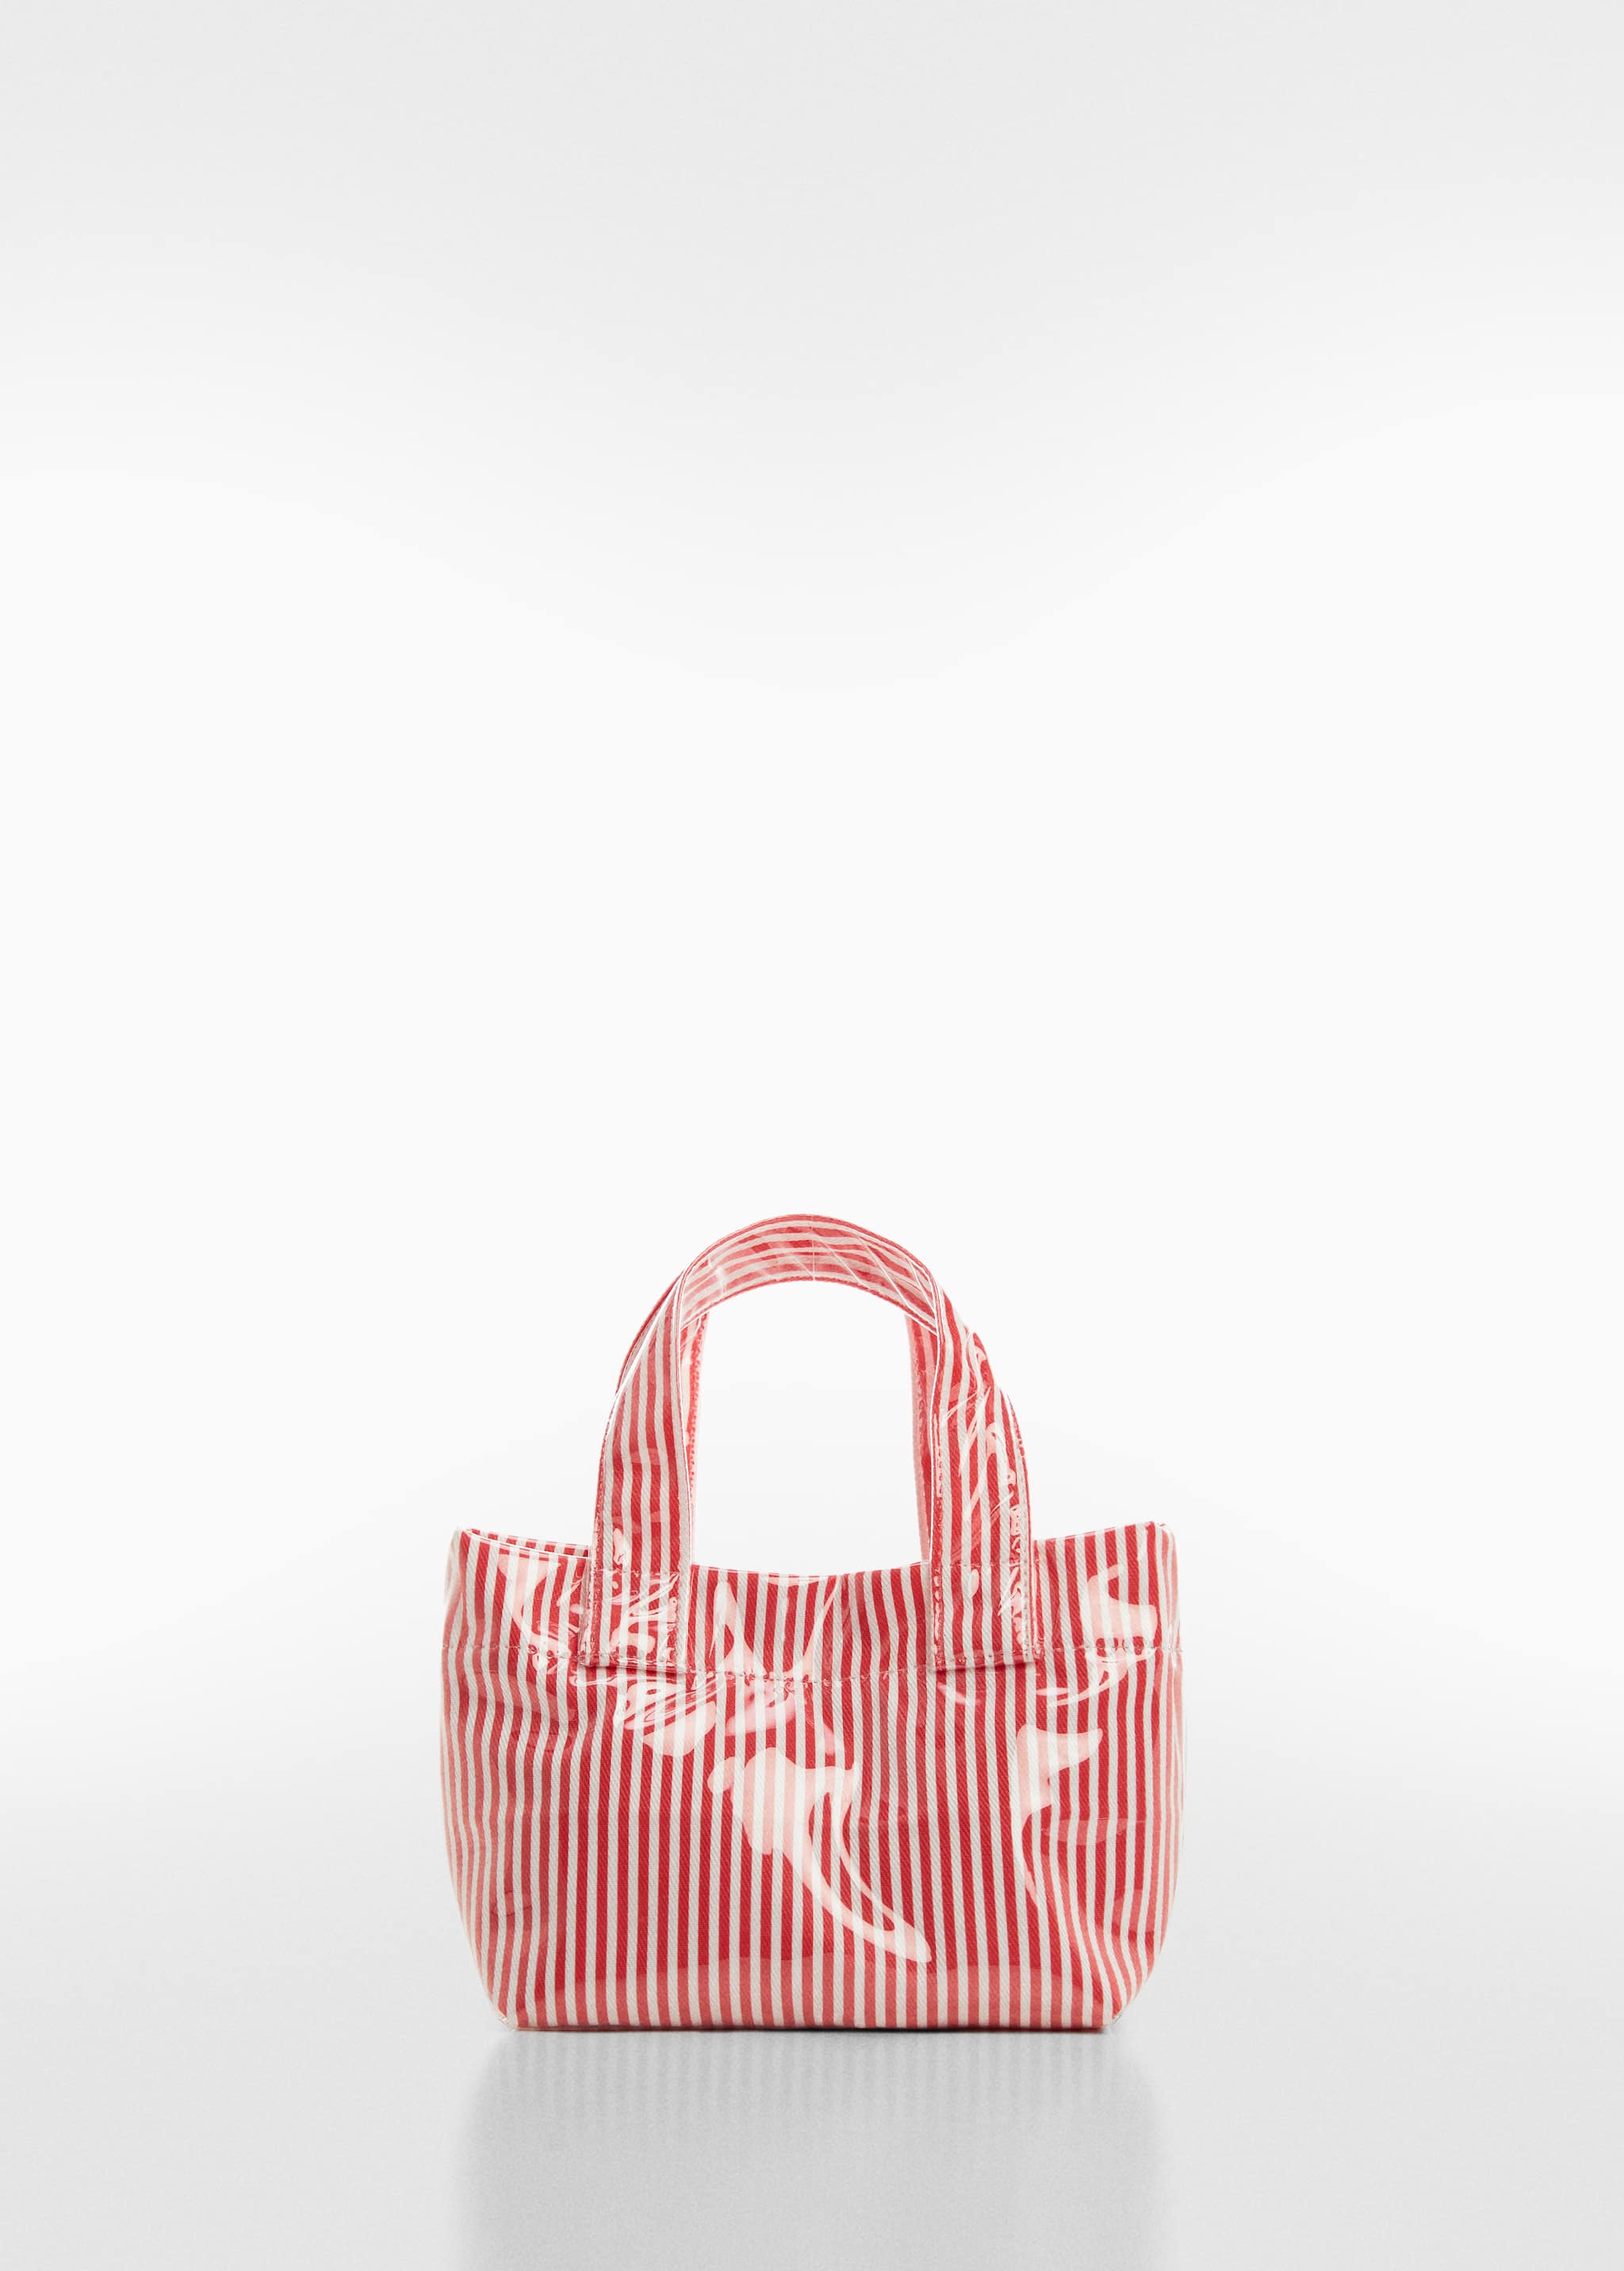 Striped handbag - Article without model